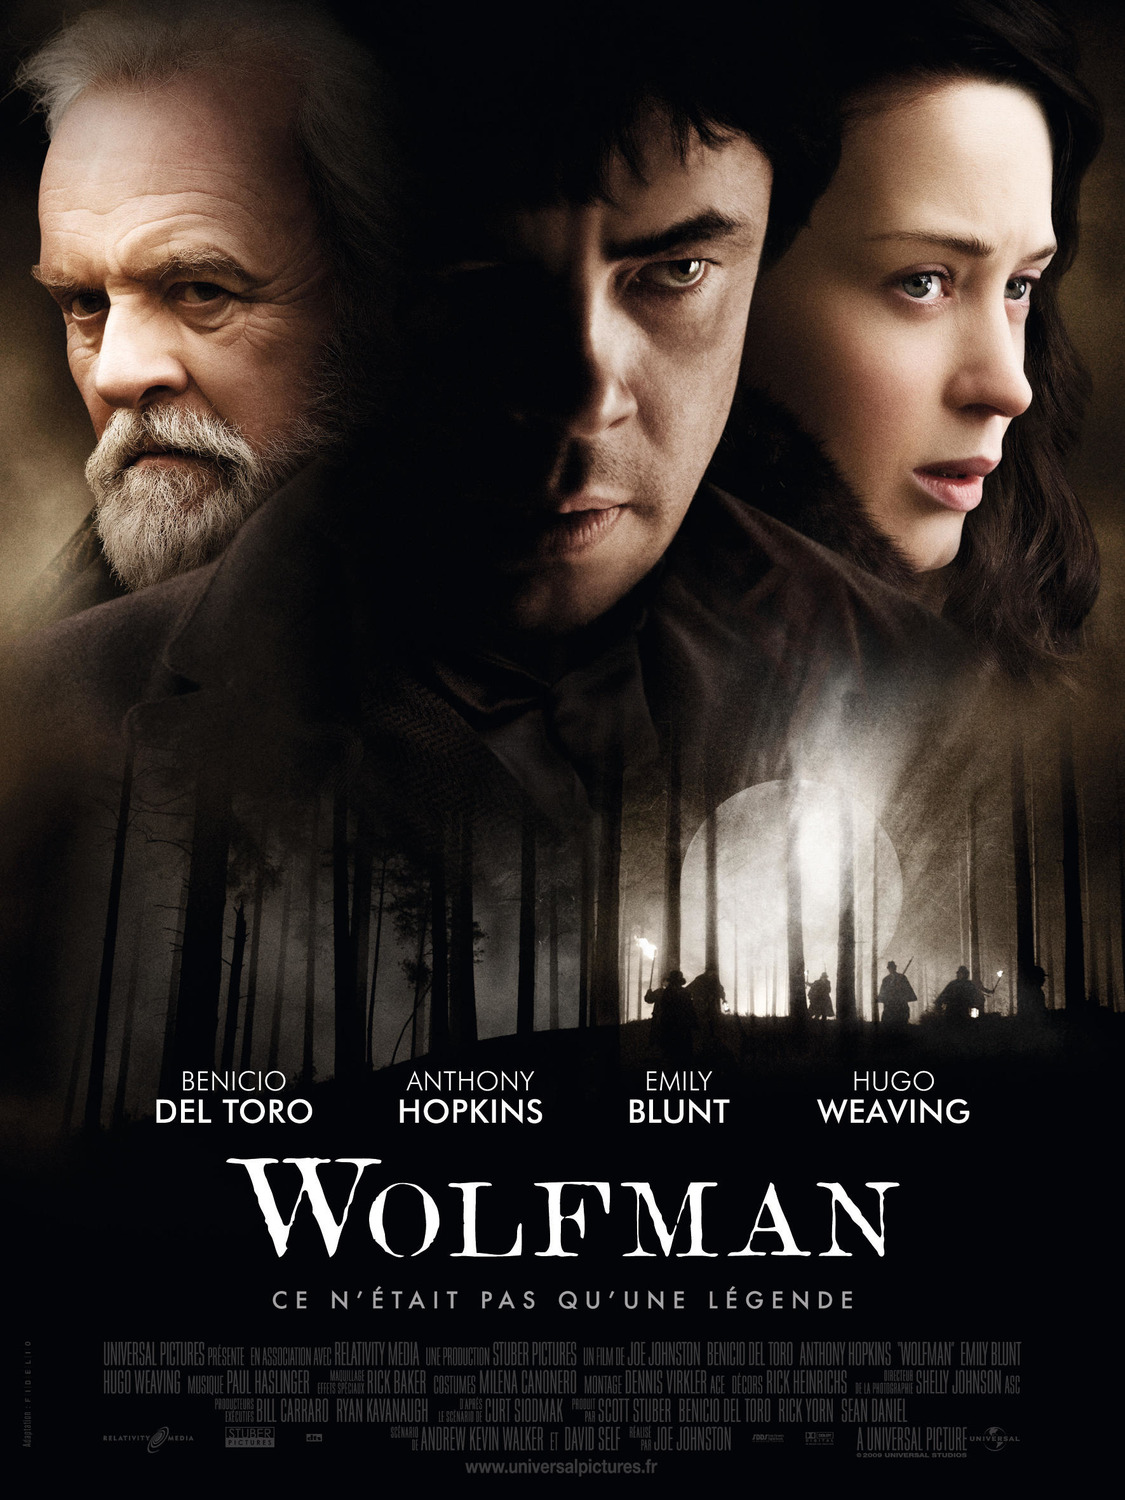 Extra Large Movie Poster Image for The Wolfman (#8 of 11)